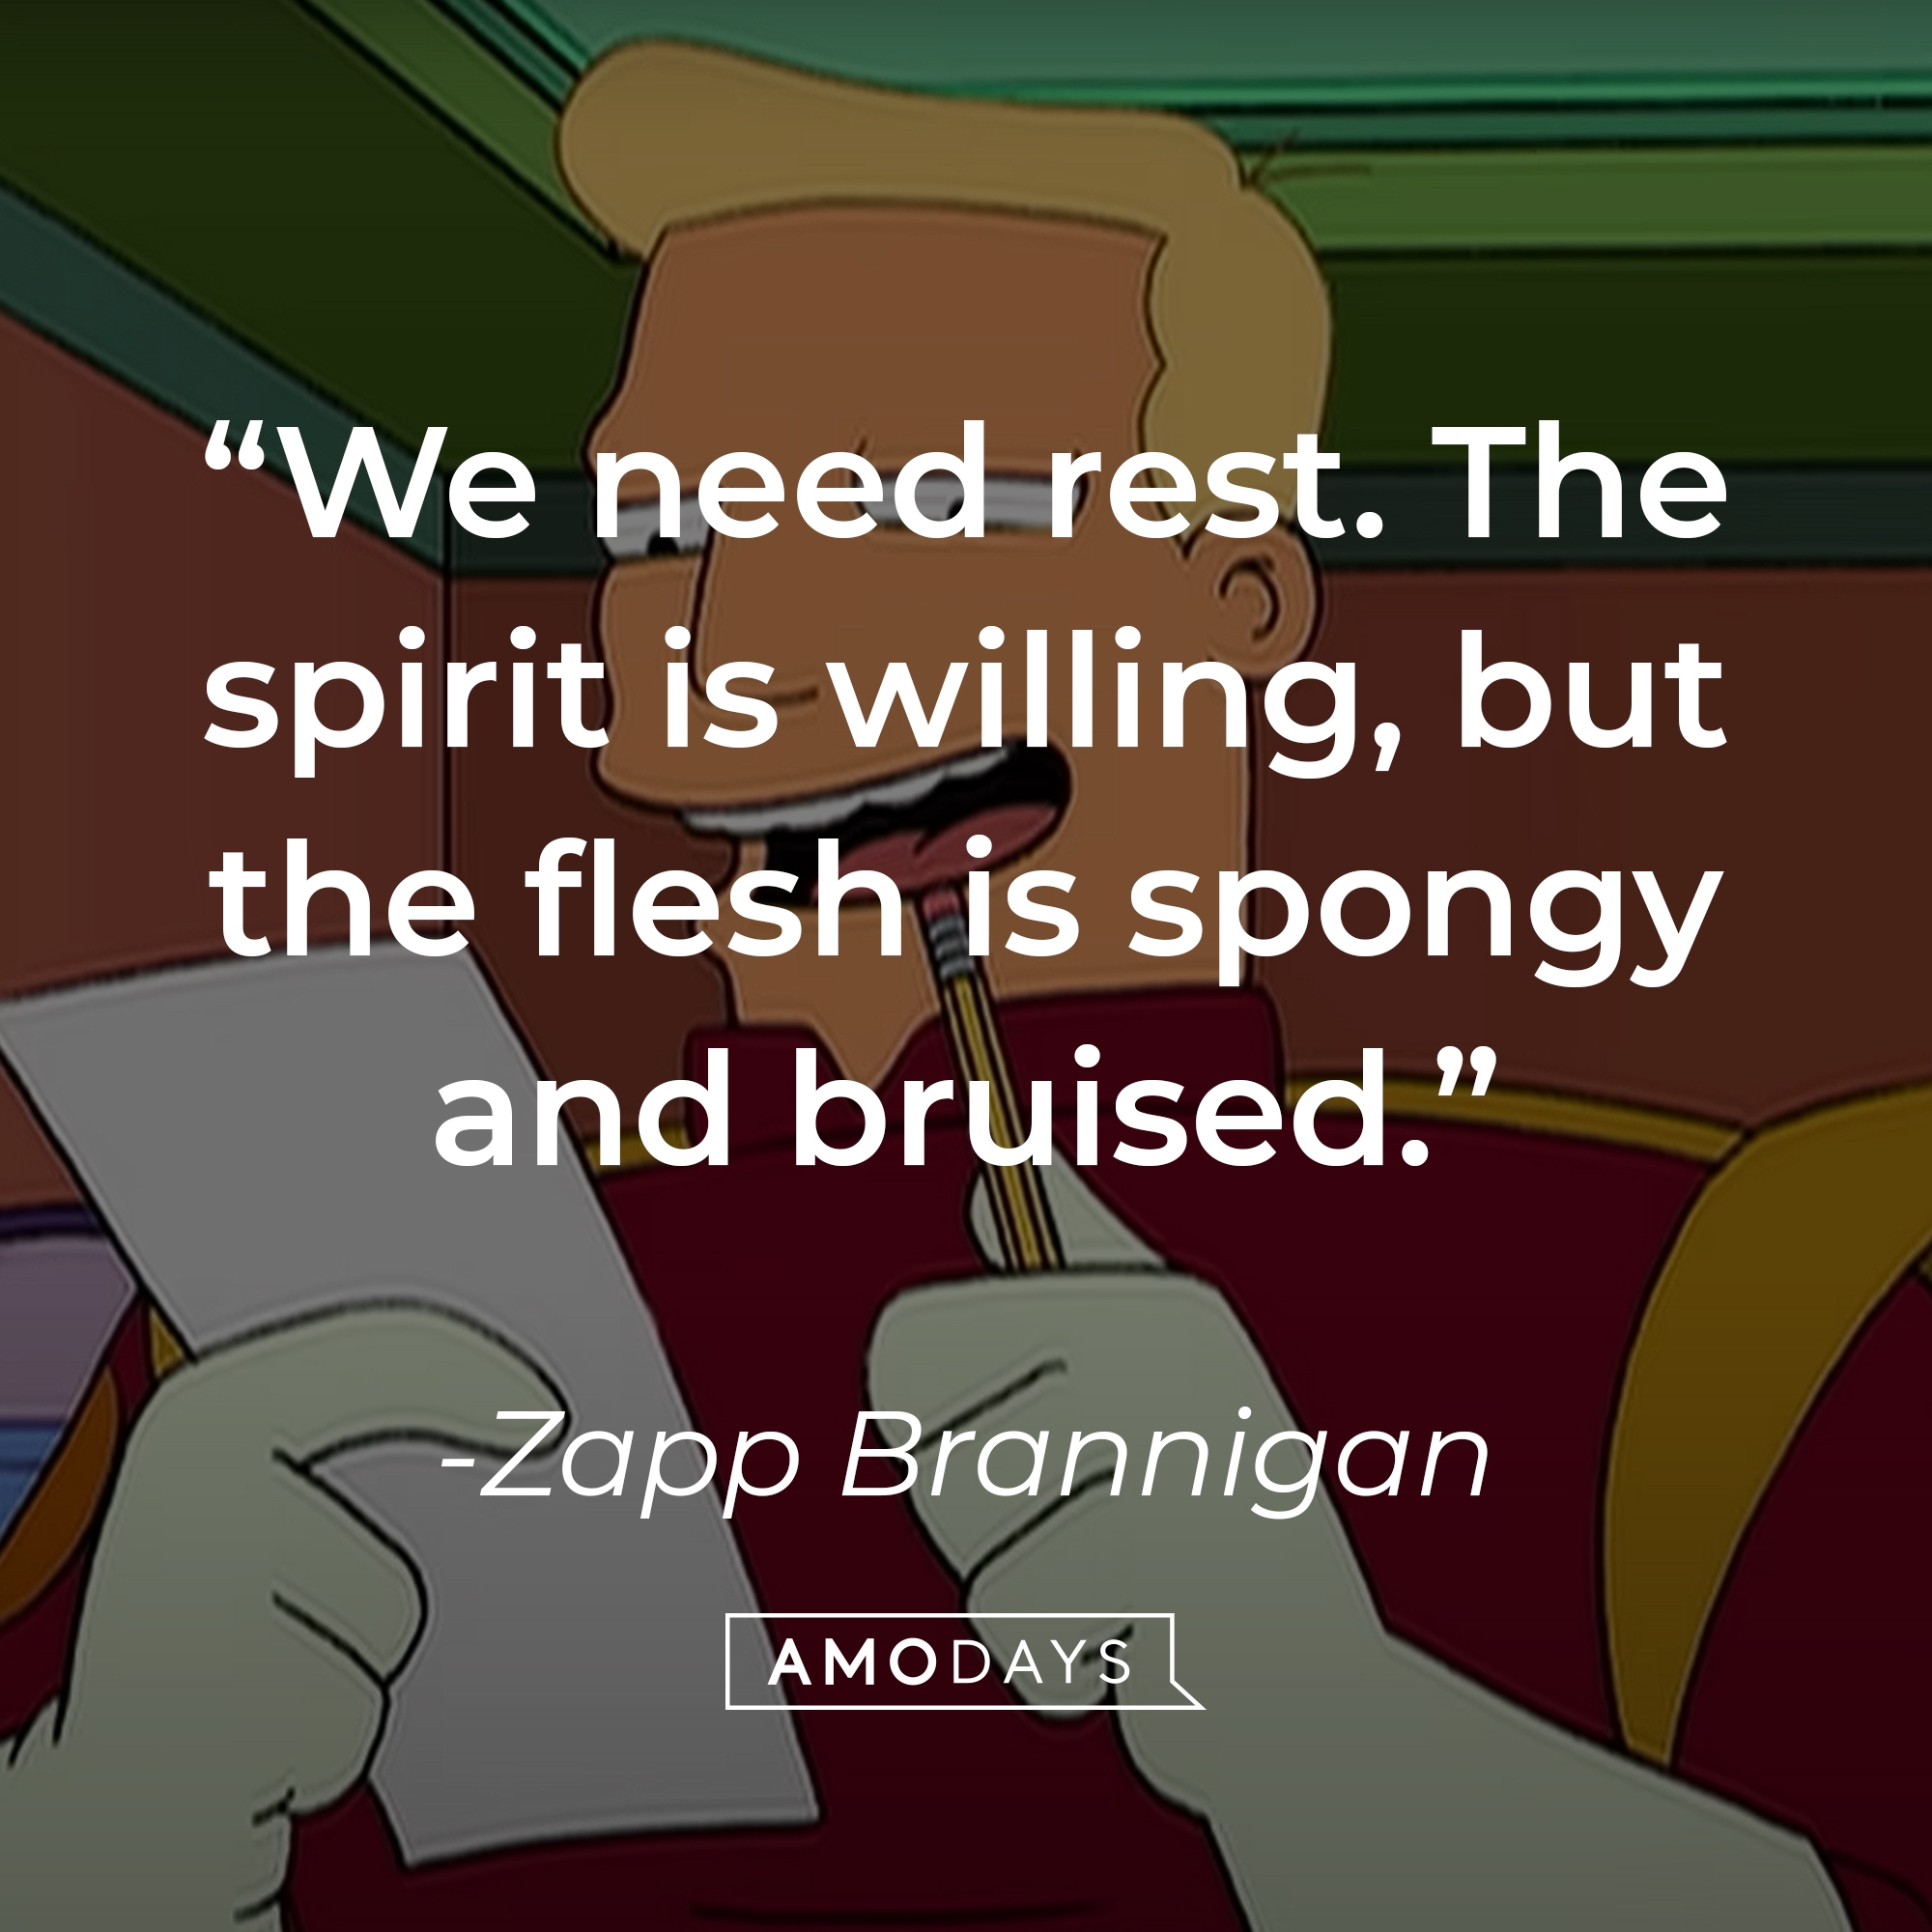 Zapp Brannigan's quote: "We need rest. The spirit is willing, but the flesh is spongy and bruised." | Source: YouTube/adultswim